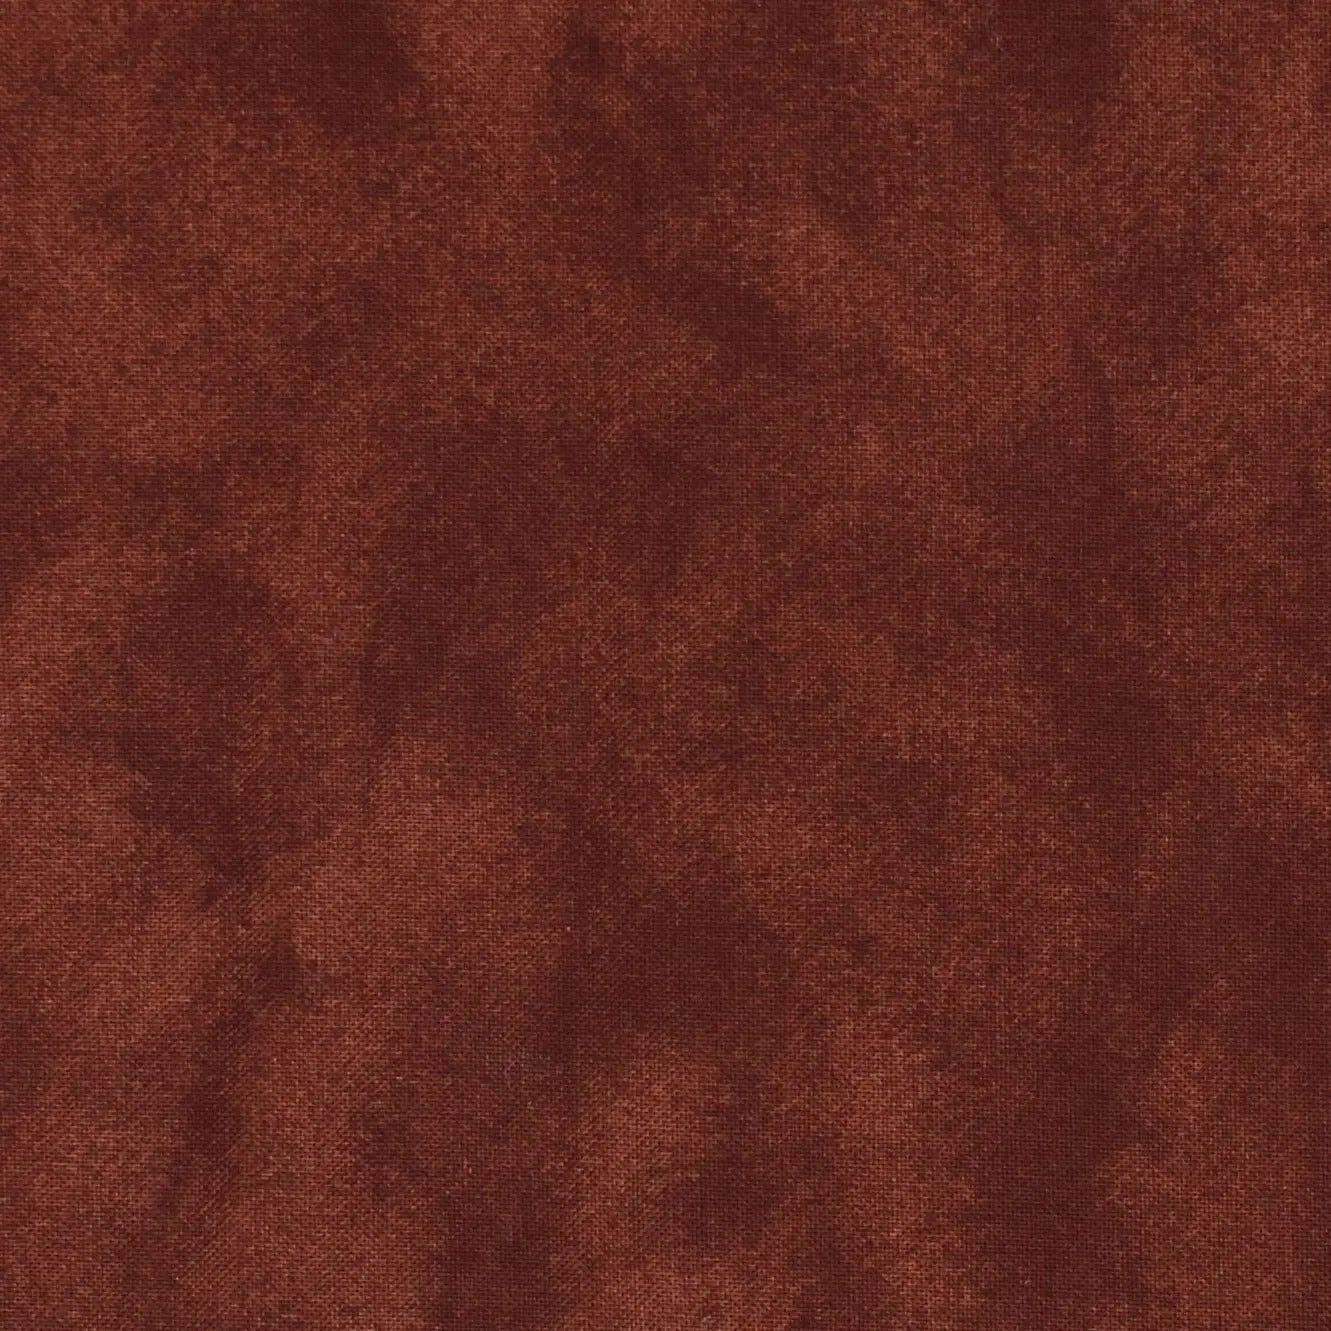 Brown Chocolate Color Waves Cotton Wideback Fabric per yard